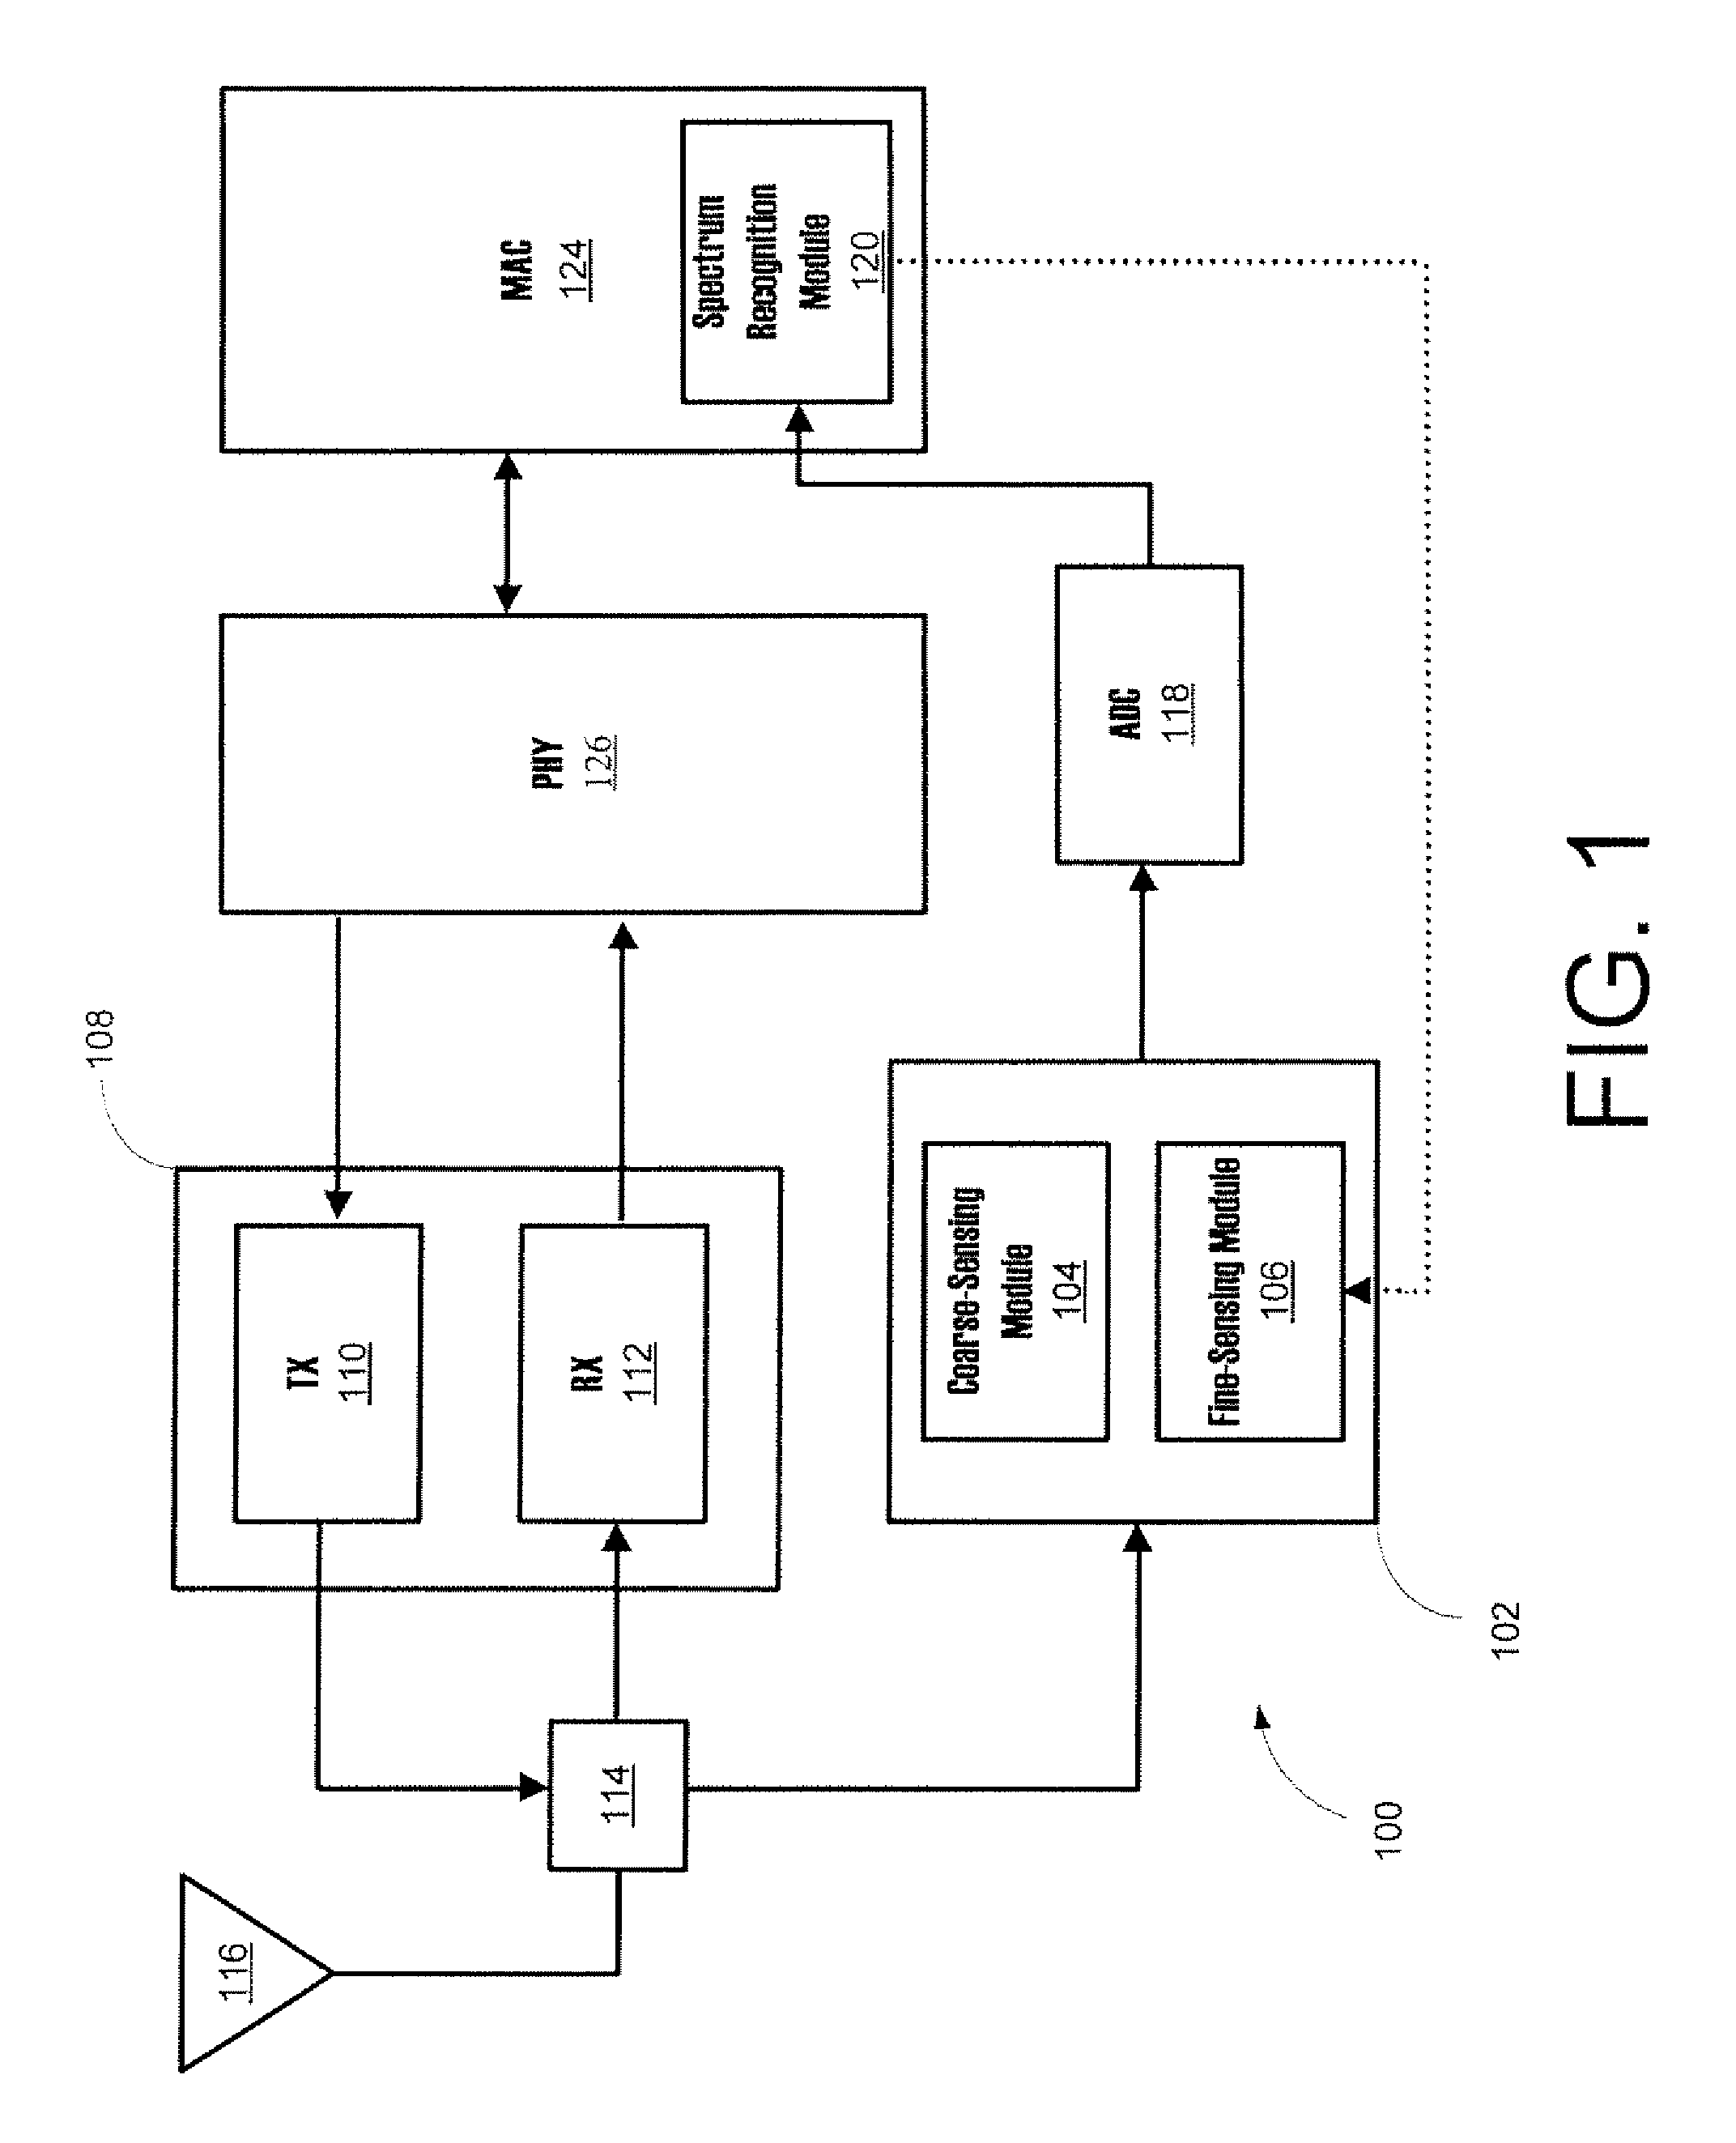 Systems, Methods, and Apparatuses for Coarse-Sensing Modules